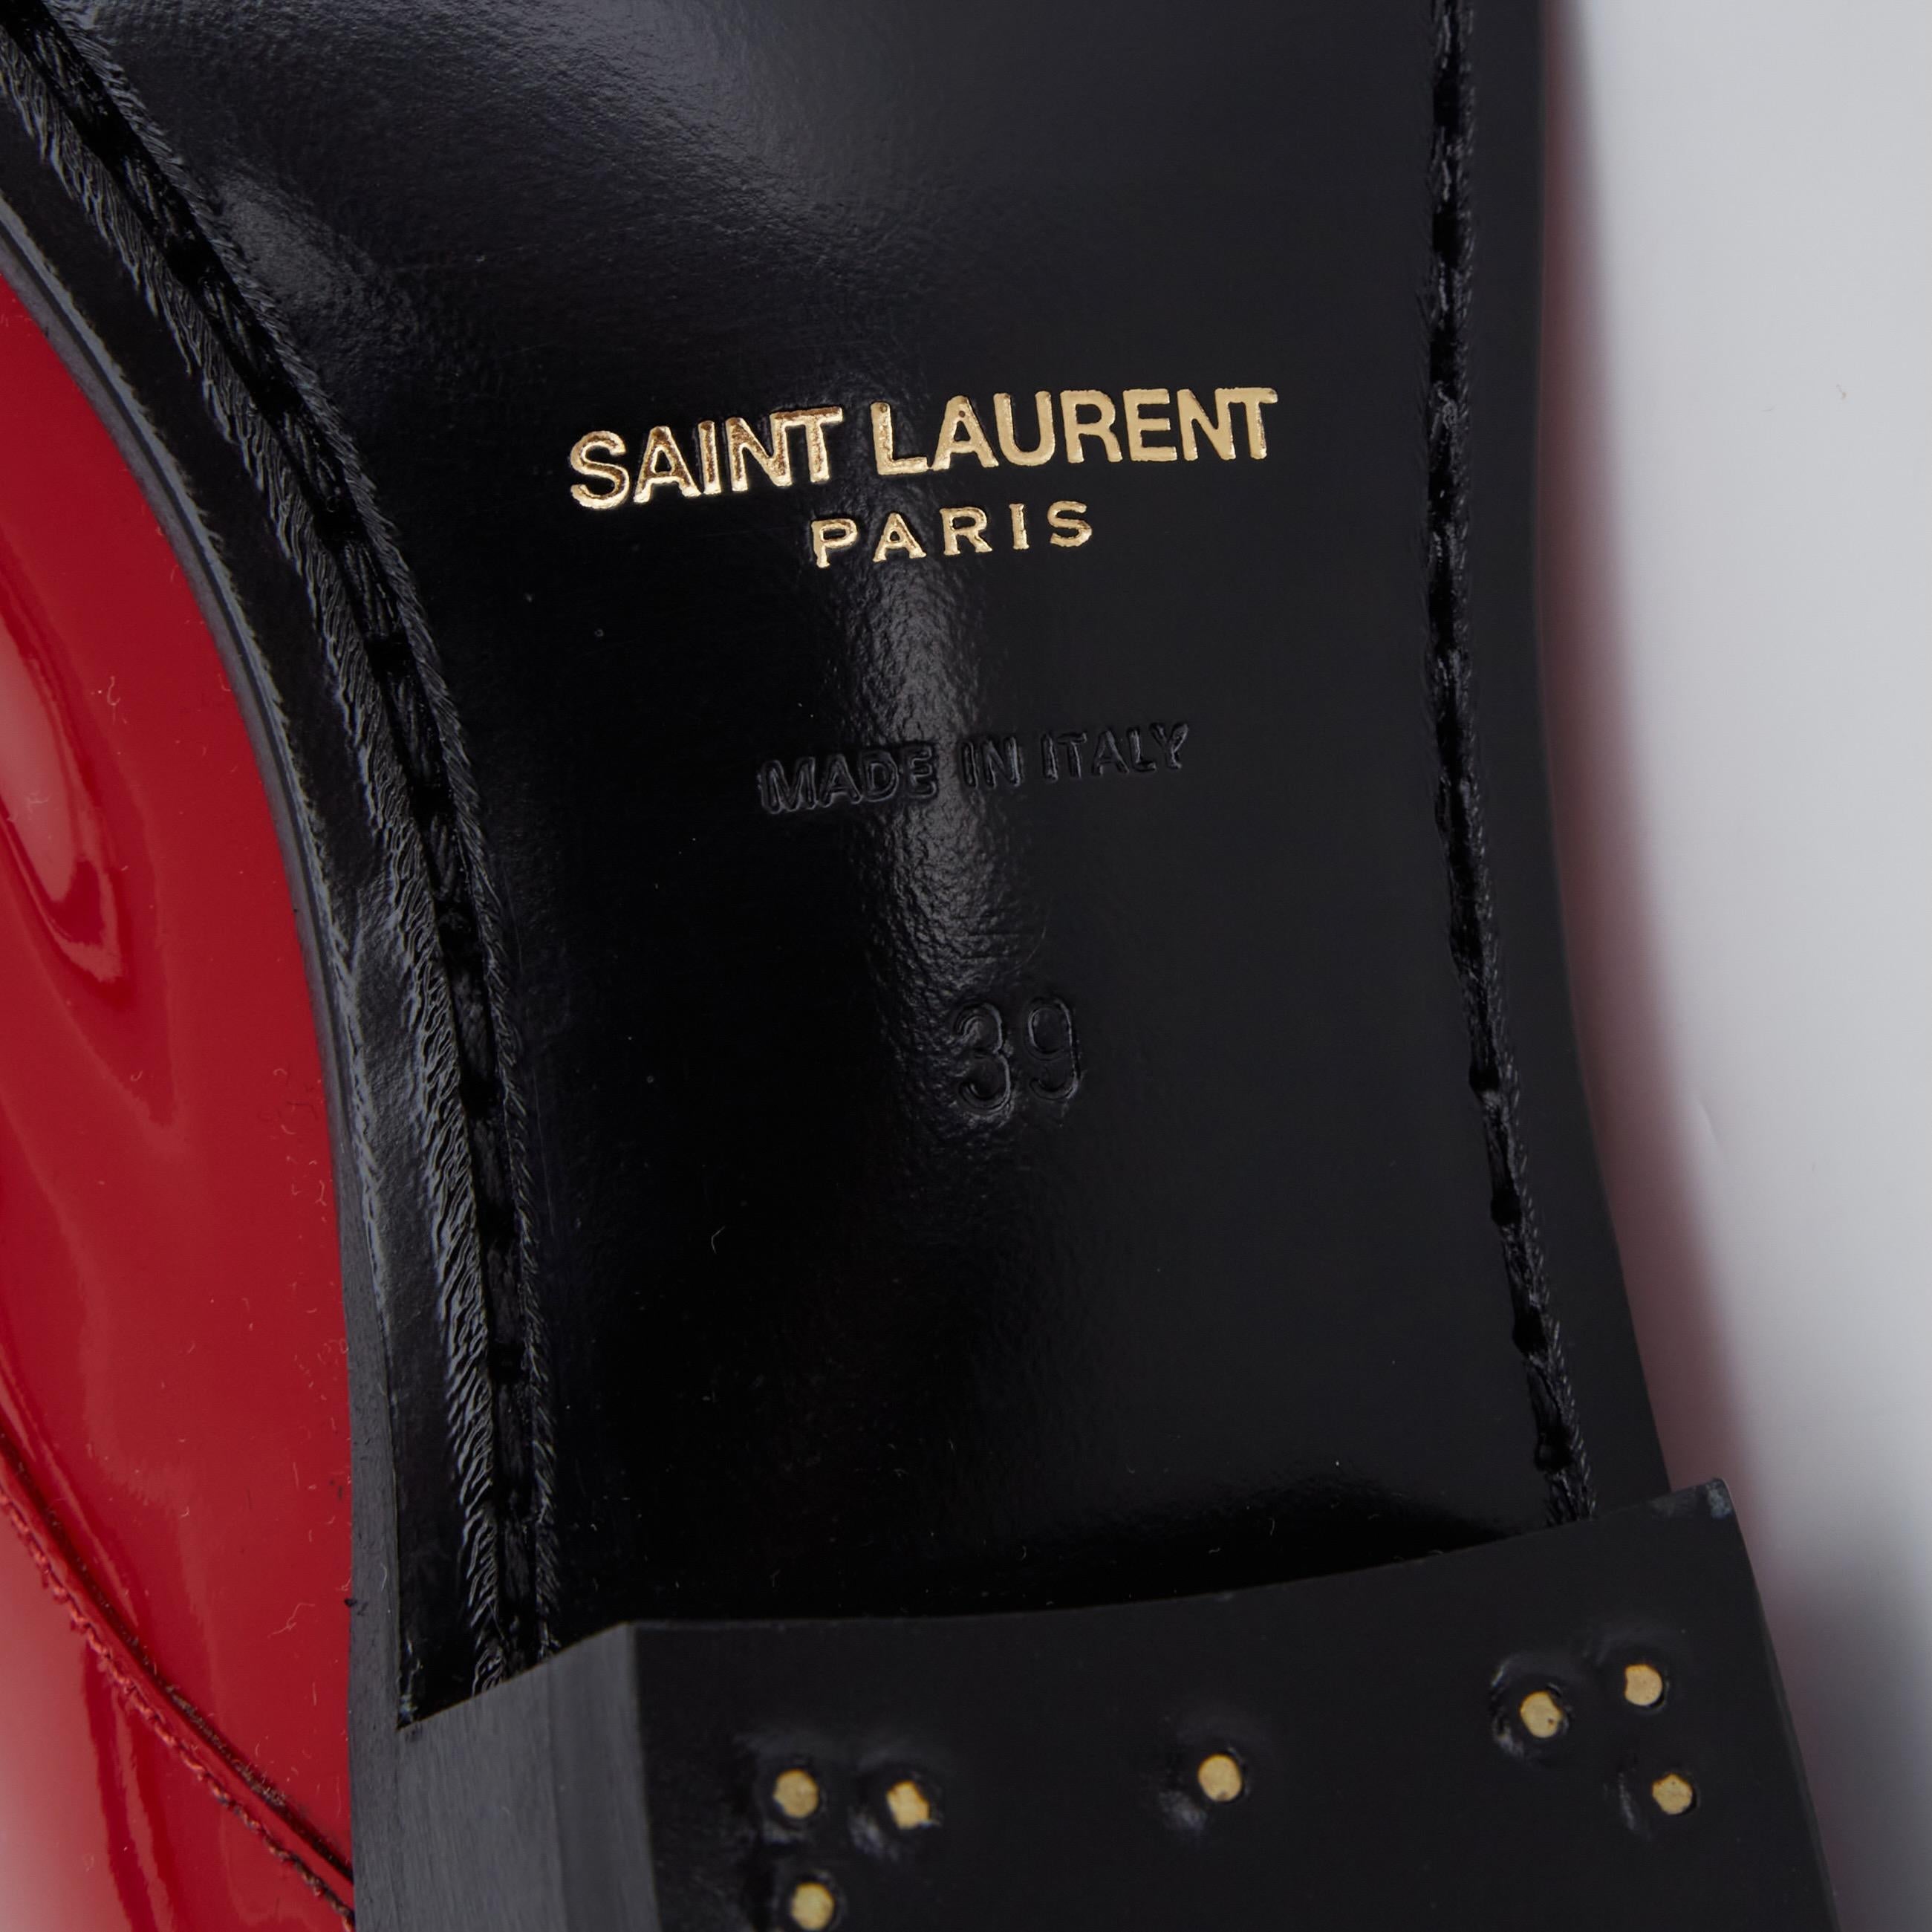 Saint Laurent Jonas Patent Red Heeled Ankle Boots (39 EU) 581845 In New Condition For Sale In Montreal, Quebec